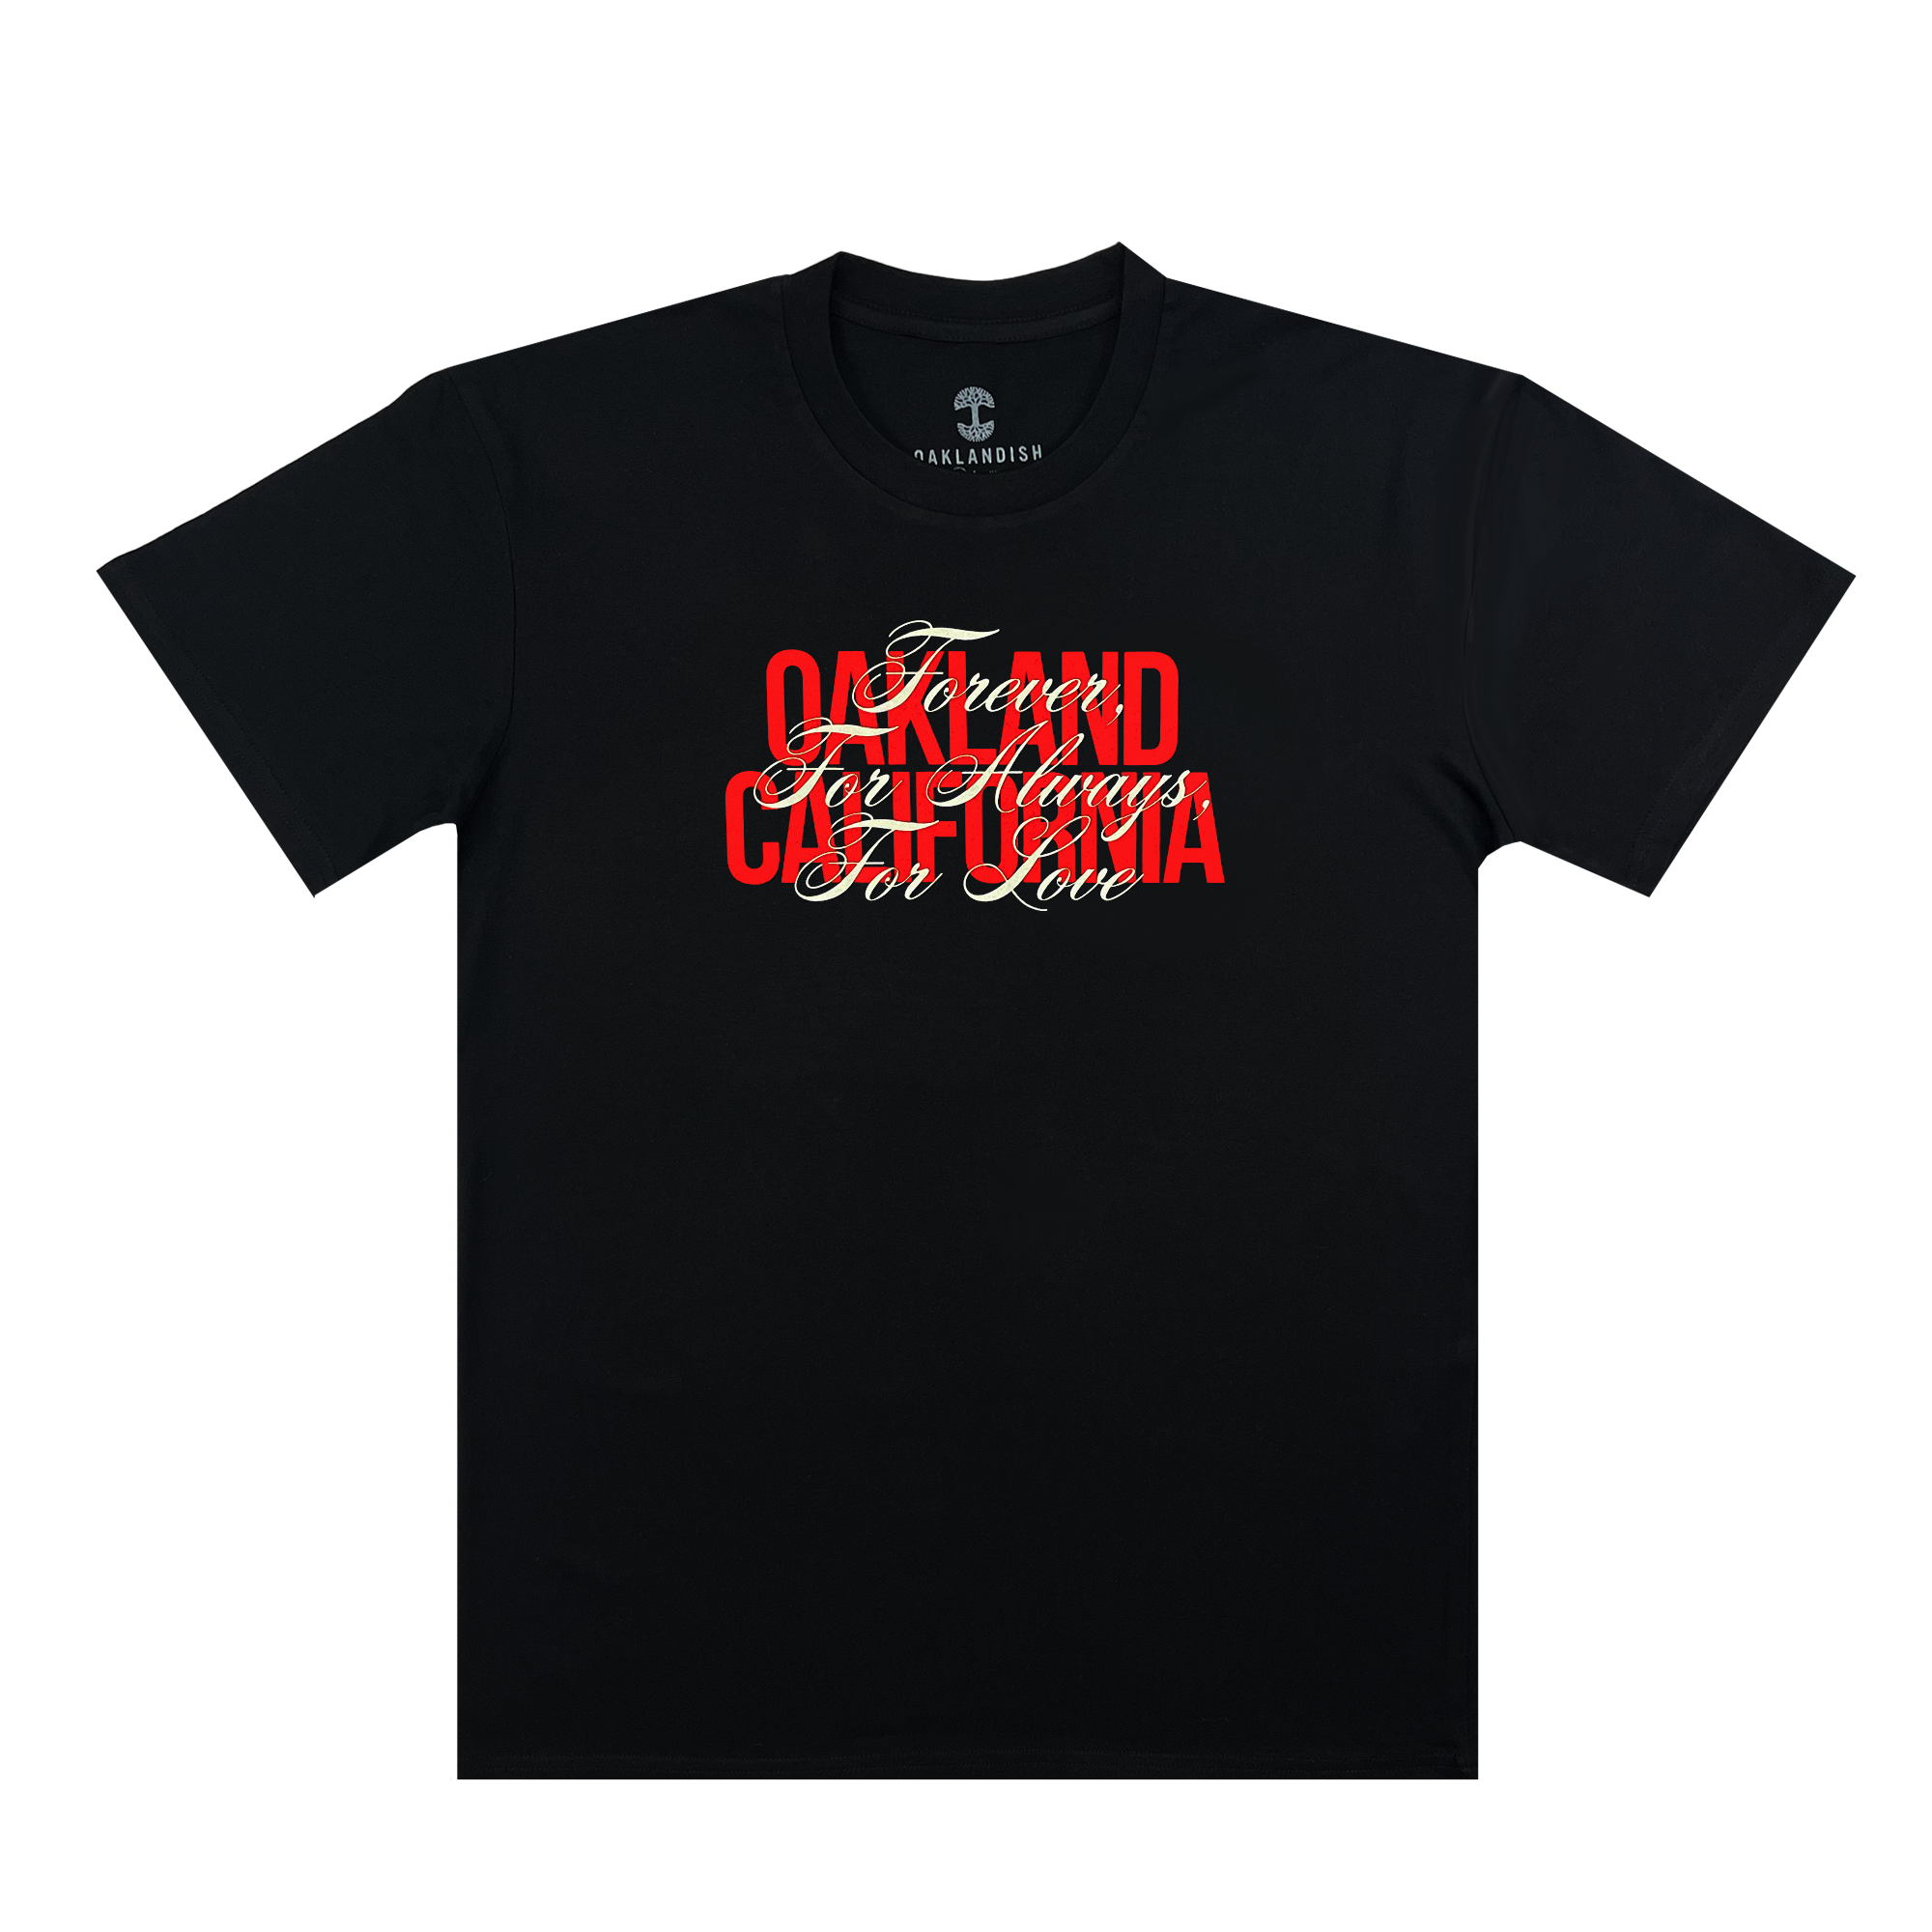 Black t-shirt with OAKLAND CALIFORNIA wordmark in red with white Forever. For Always. For Love in script on top.